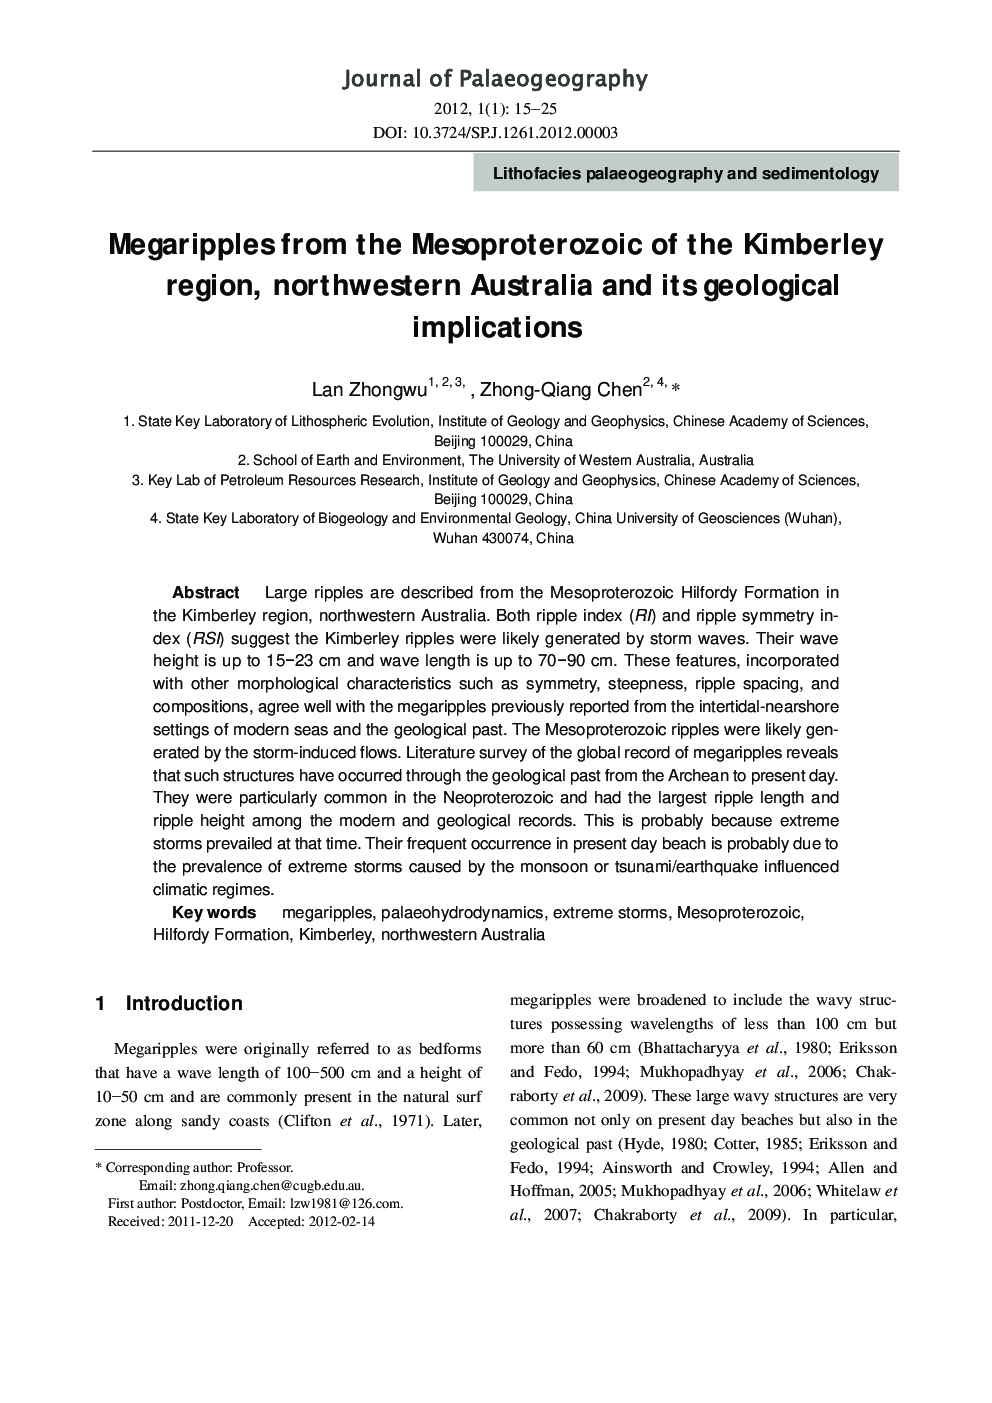 Megaripples from the Mesoproterozoic of the Kimberley region, northwestern Australia and its geological implications